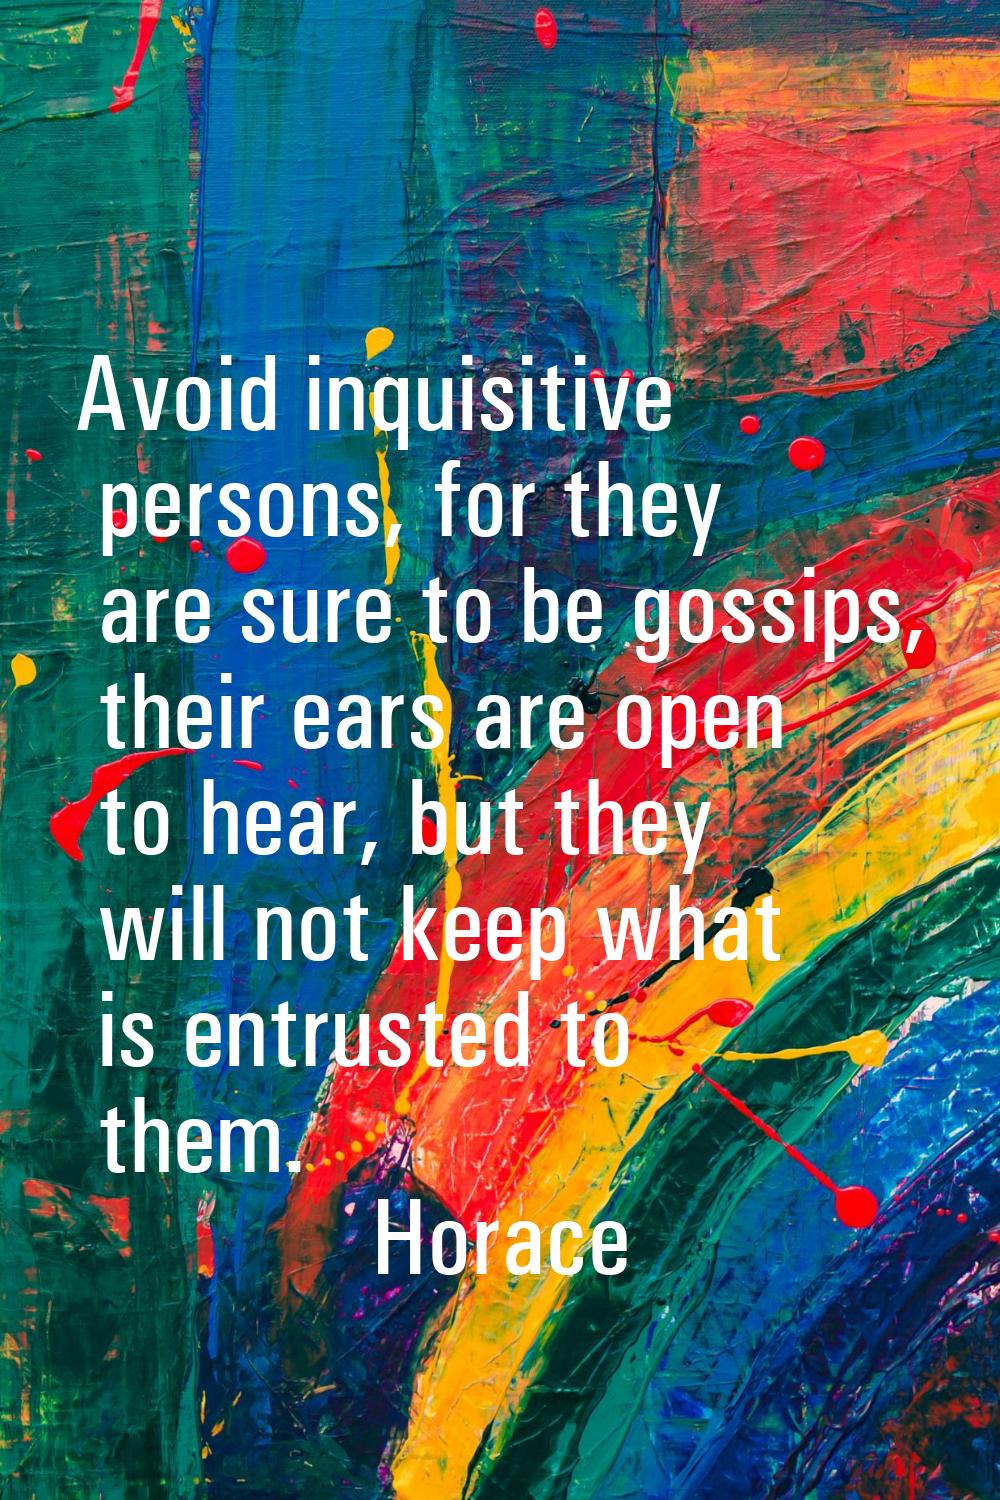 Avoid inquisitive persons, for they are sure to be gossips, their ears are open to hear, but they w